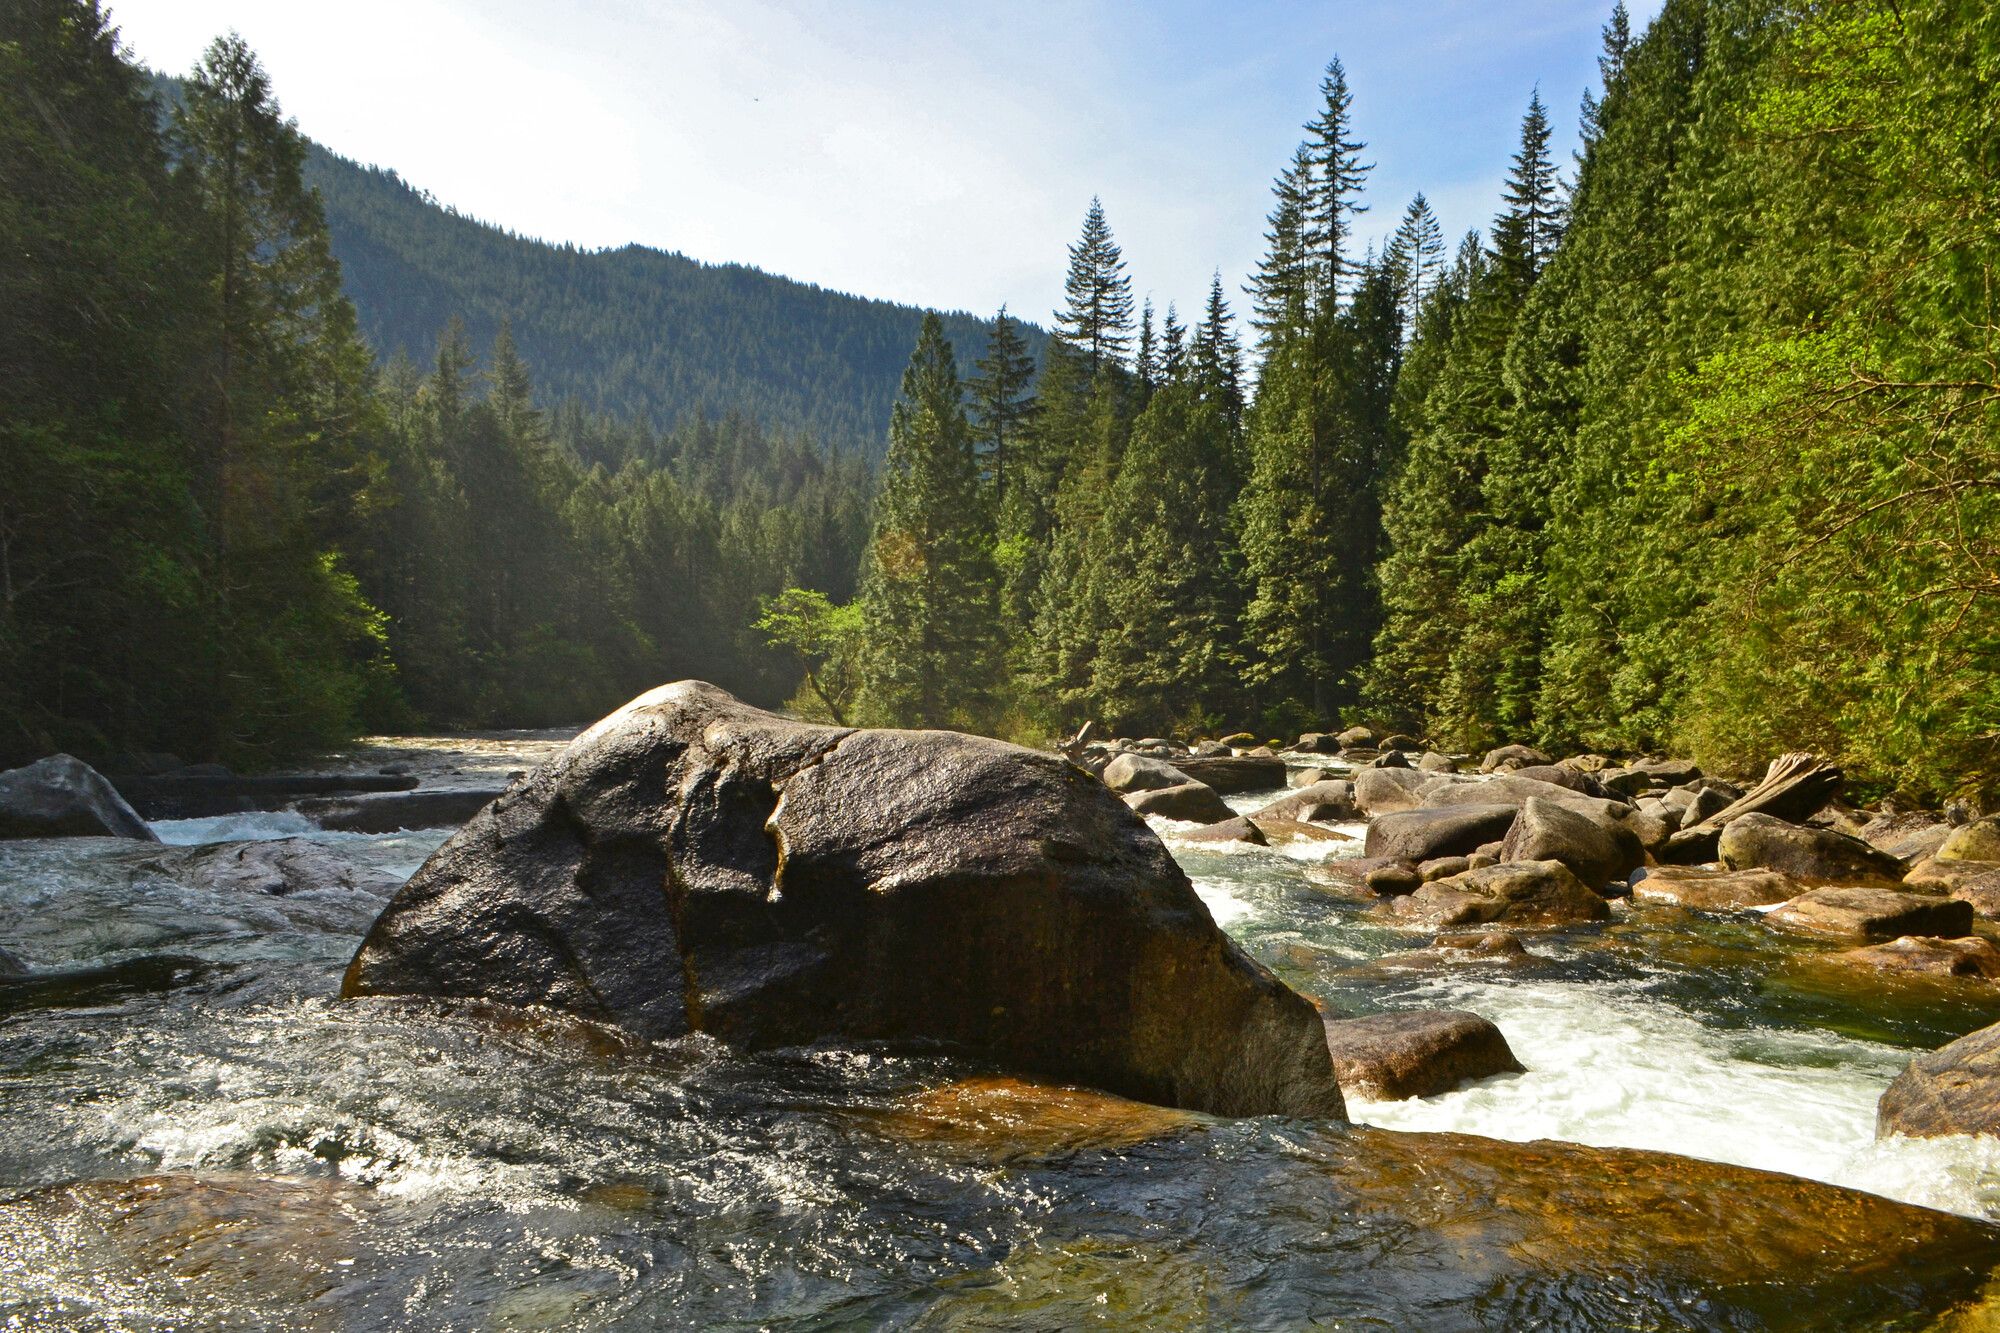 Mountains and forest are the backdrop to Golden Creek and its large creek bed boulders. Golden Ears Park.